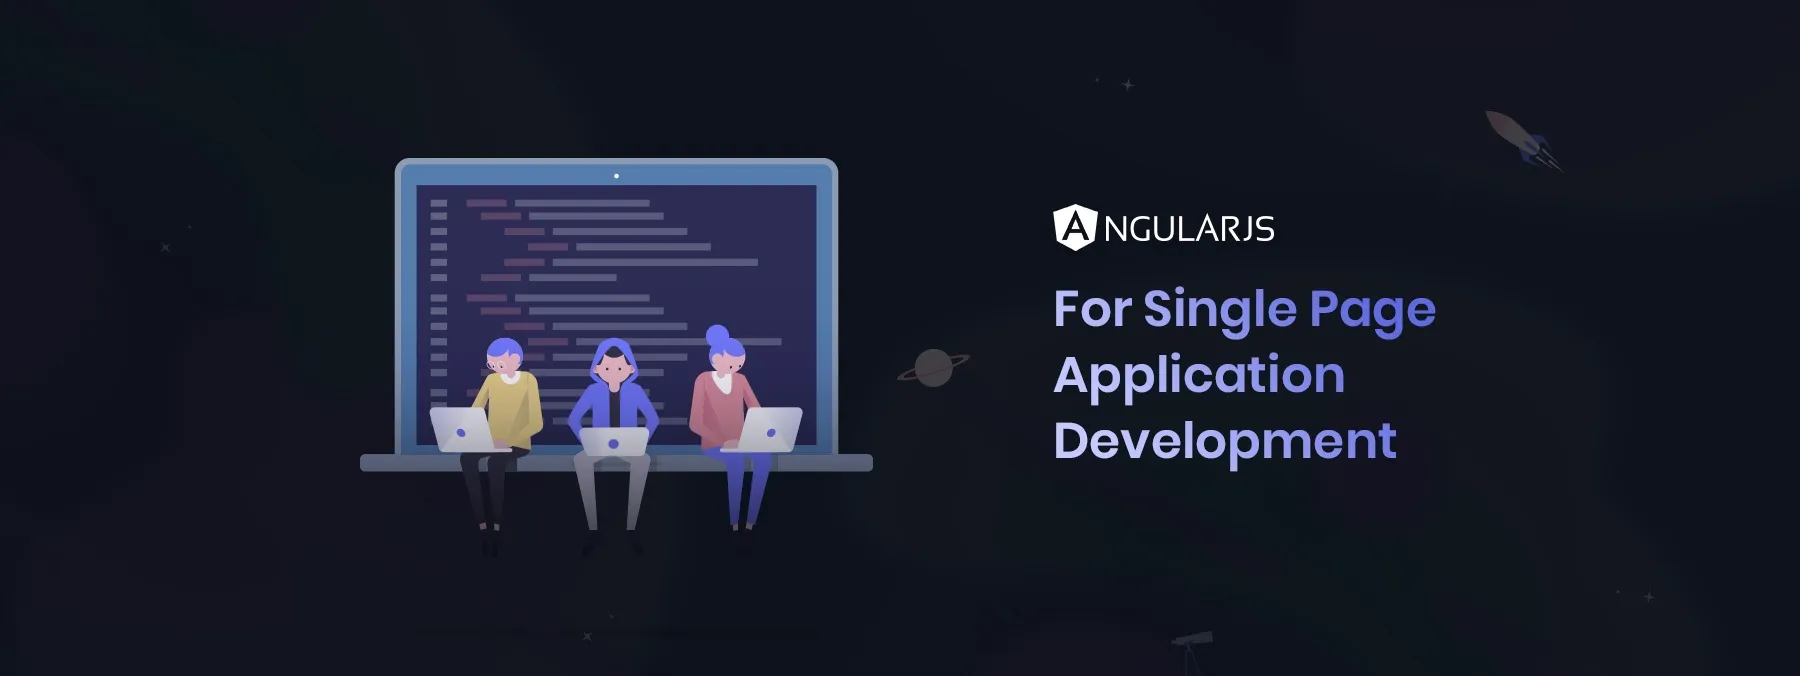 Why Prefer AngularJS for Single Page Application Development?